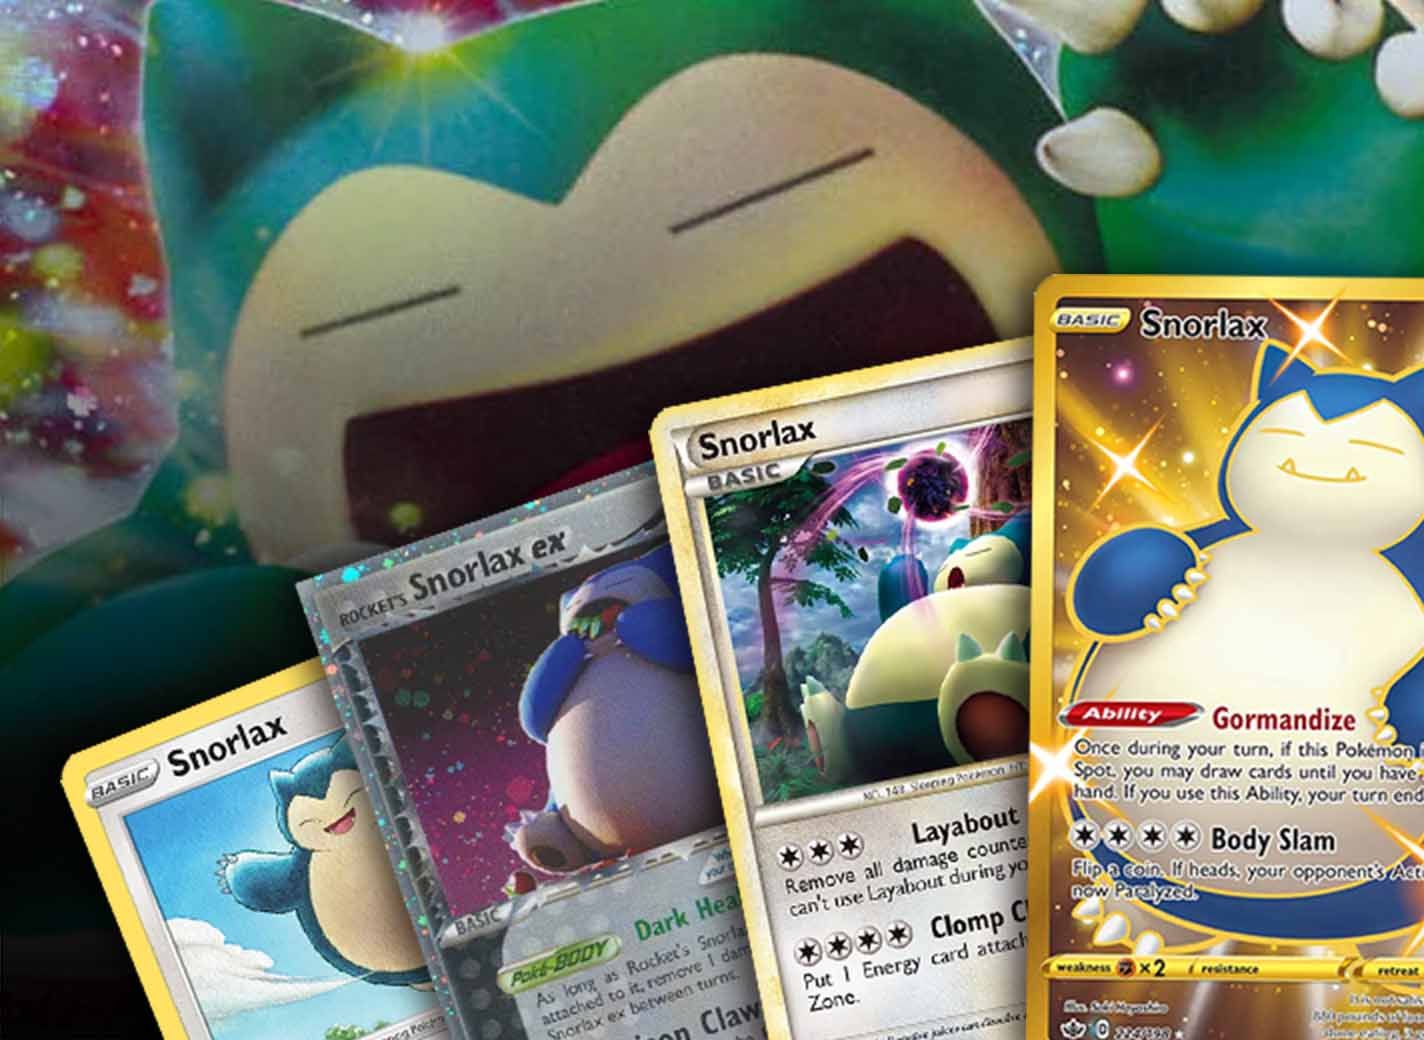 Top 5 Most Expensive Snorlax Pokémon Cards